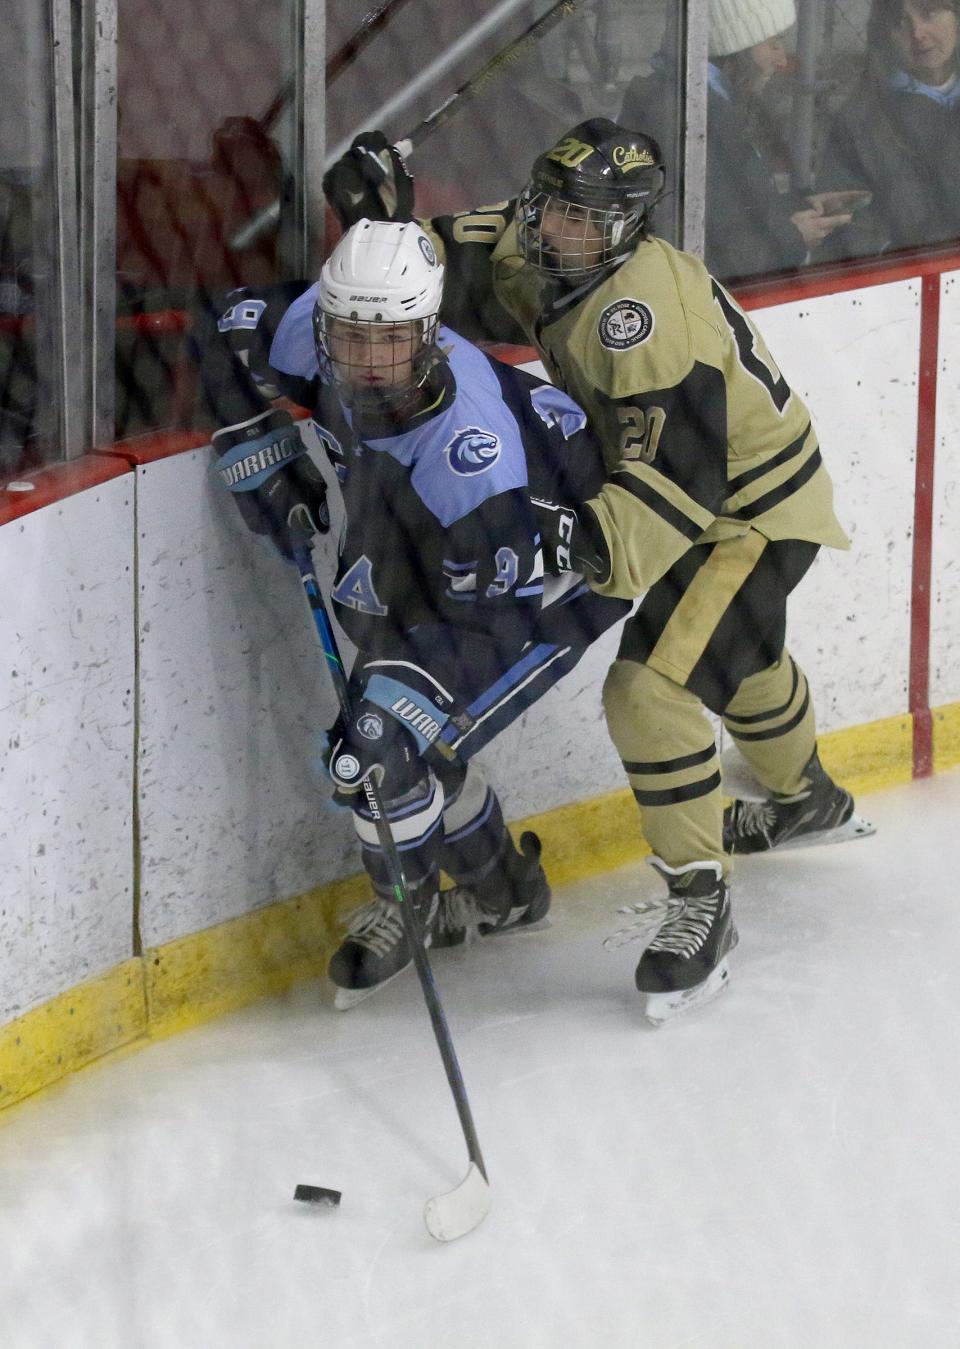 CBA's Derek Fiore (#9) moves the puck in the corner ahead of a Catholic defender during their game at the Jersey Shore Arena in Wall Monday afternoon, December 19, 2022.